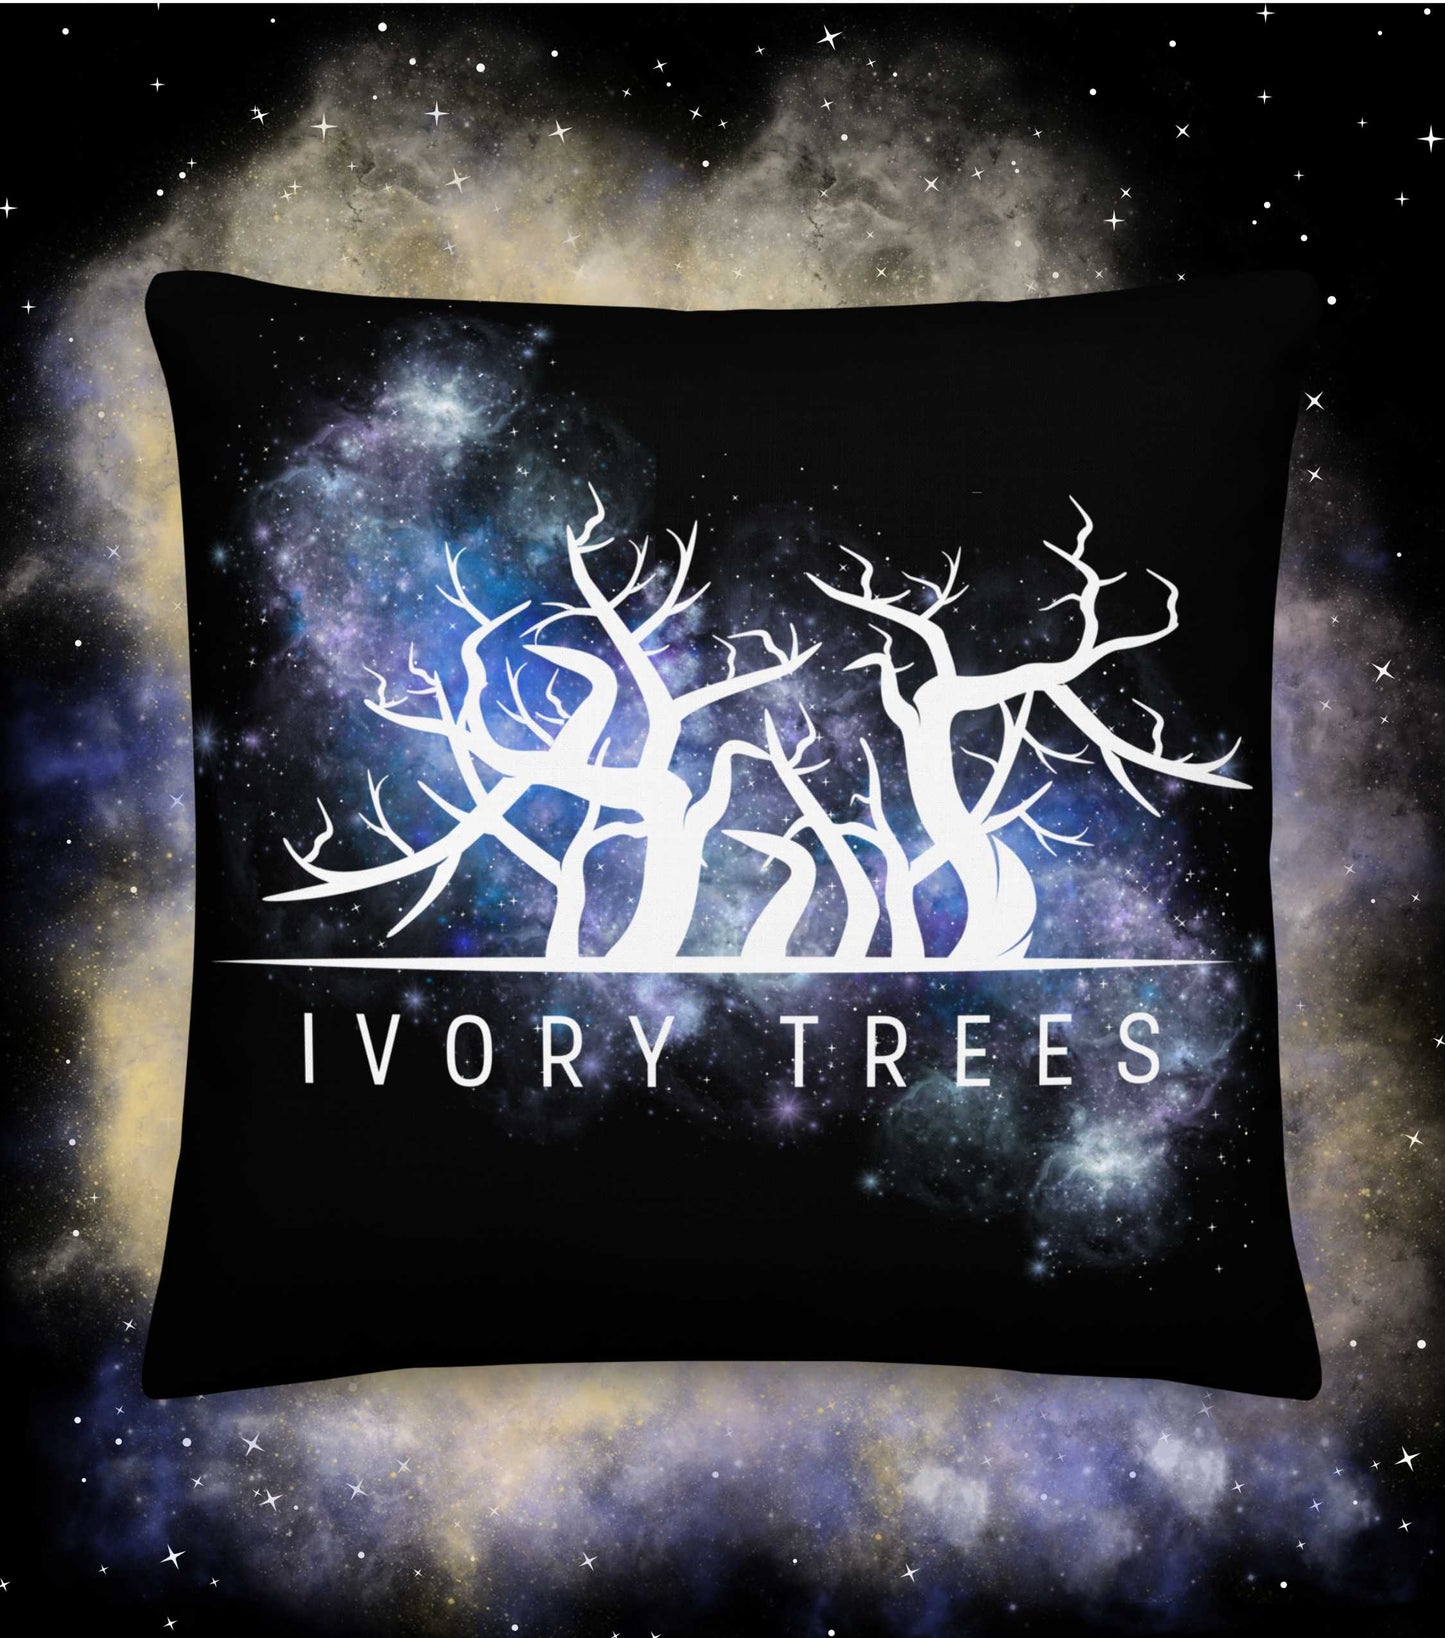 IVORY TREES NEBULA Premium Pillow - The Diving Universe by Kristine Kathryn Rusch